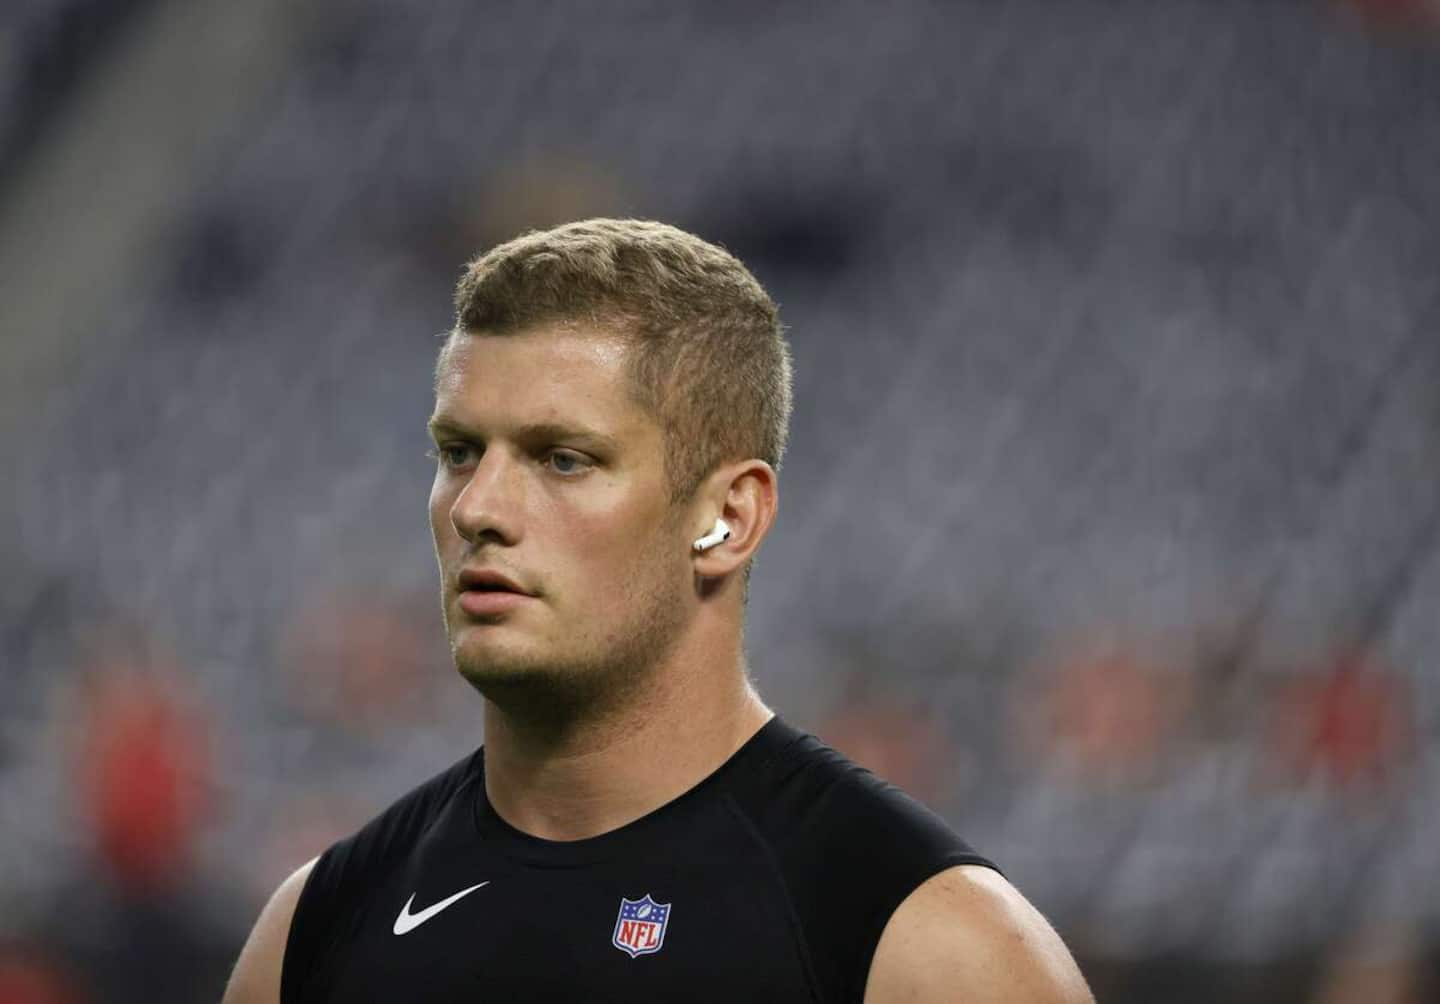 Coming out: a difficult decision that Carl Nassib does not regret